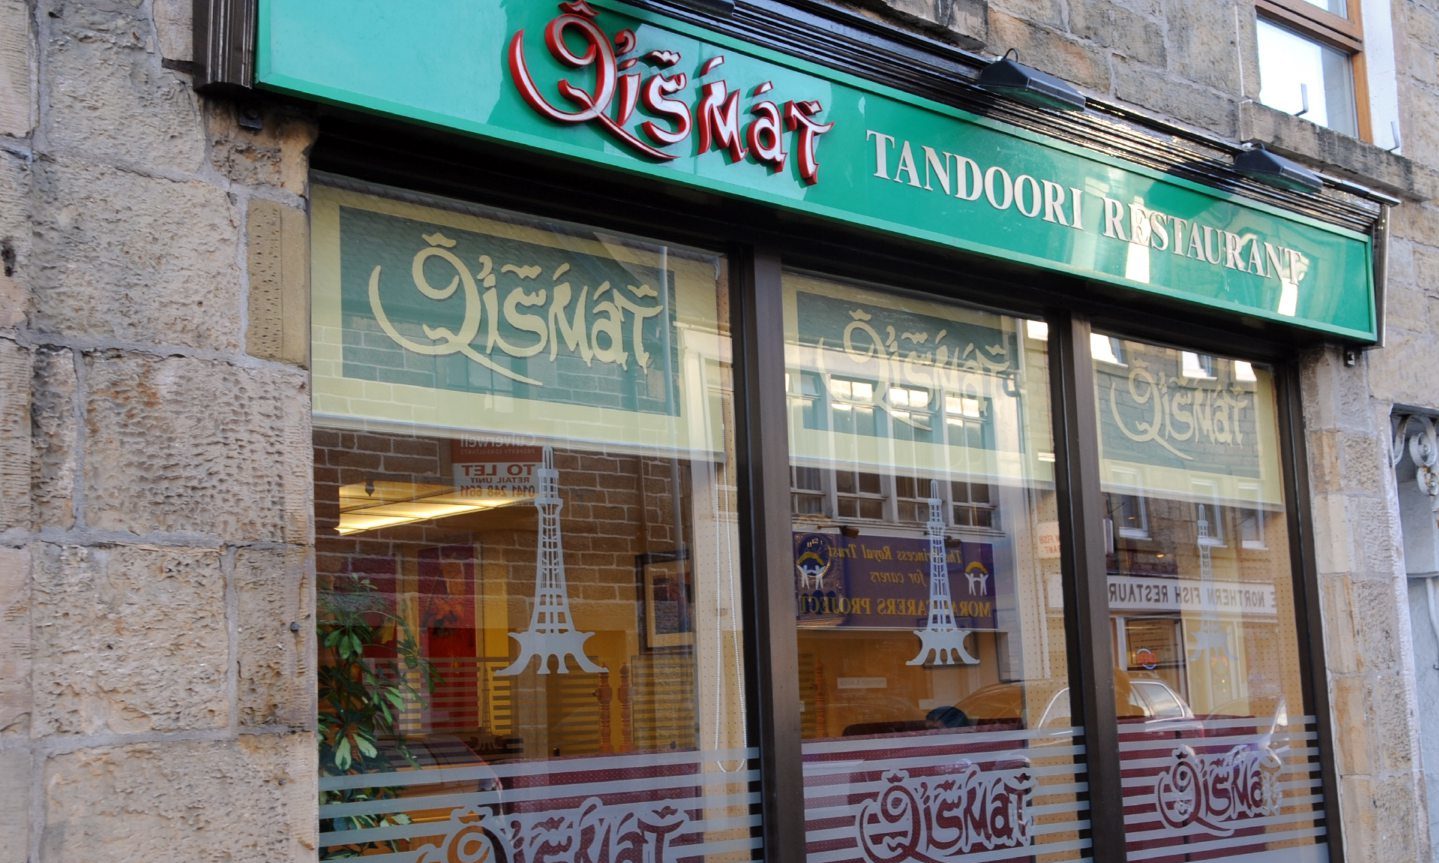 Popular Elgin Indian Restaurant To Temporarily Close For Covid Testing